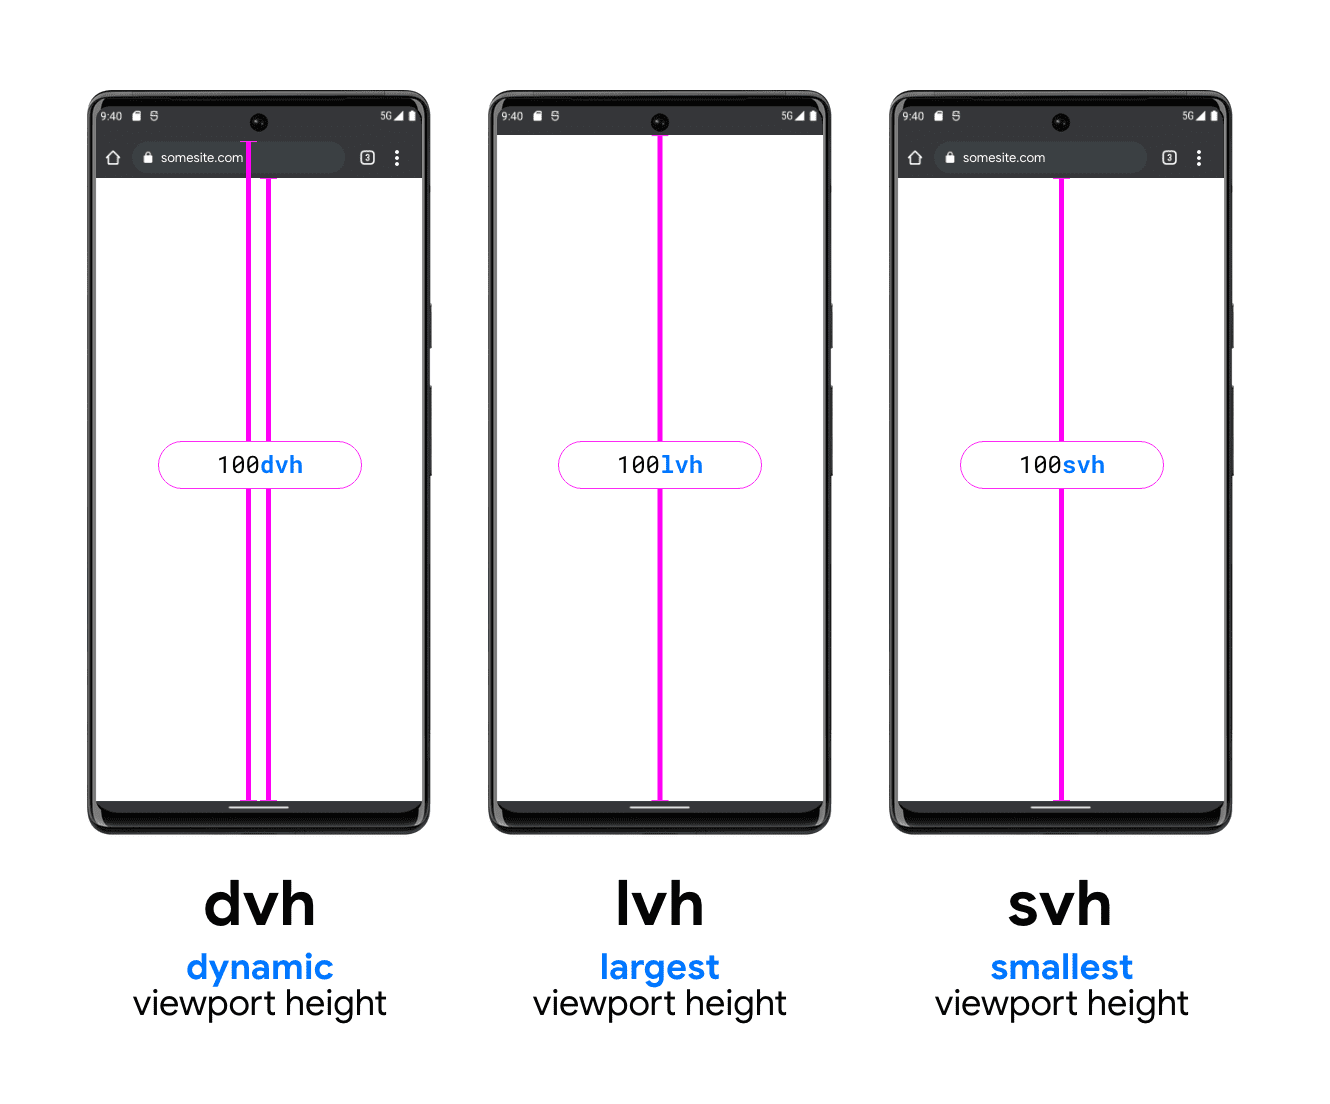 A graphic with three phones to help illustrate DVH, LVH and SVH. The DVH
   example phone has two vertical lines, one between the bottom of the search bar
   and the bottom of the viewport and one between above the search bar (under the
   system status bar) to the bottom of the viewport; showing how DVH can be either
   of these two lengths. LVH is shown in the middle with one line between the
   bottom of the device status bar and the button of the phone viewport. The last is
   the SVH unit example, showing a line from the bottom of the browser search bar
   to the bottom of the viewport